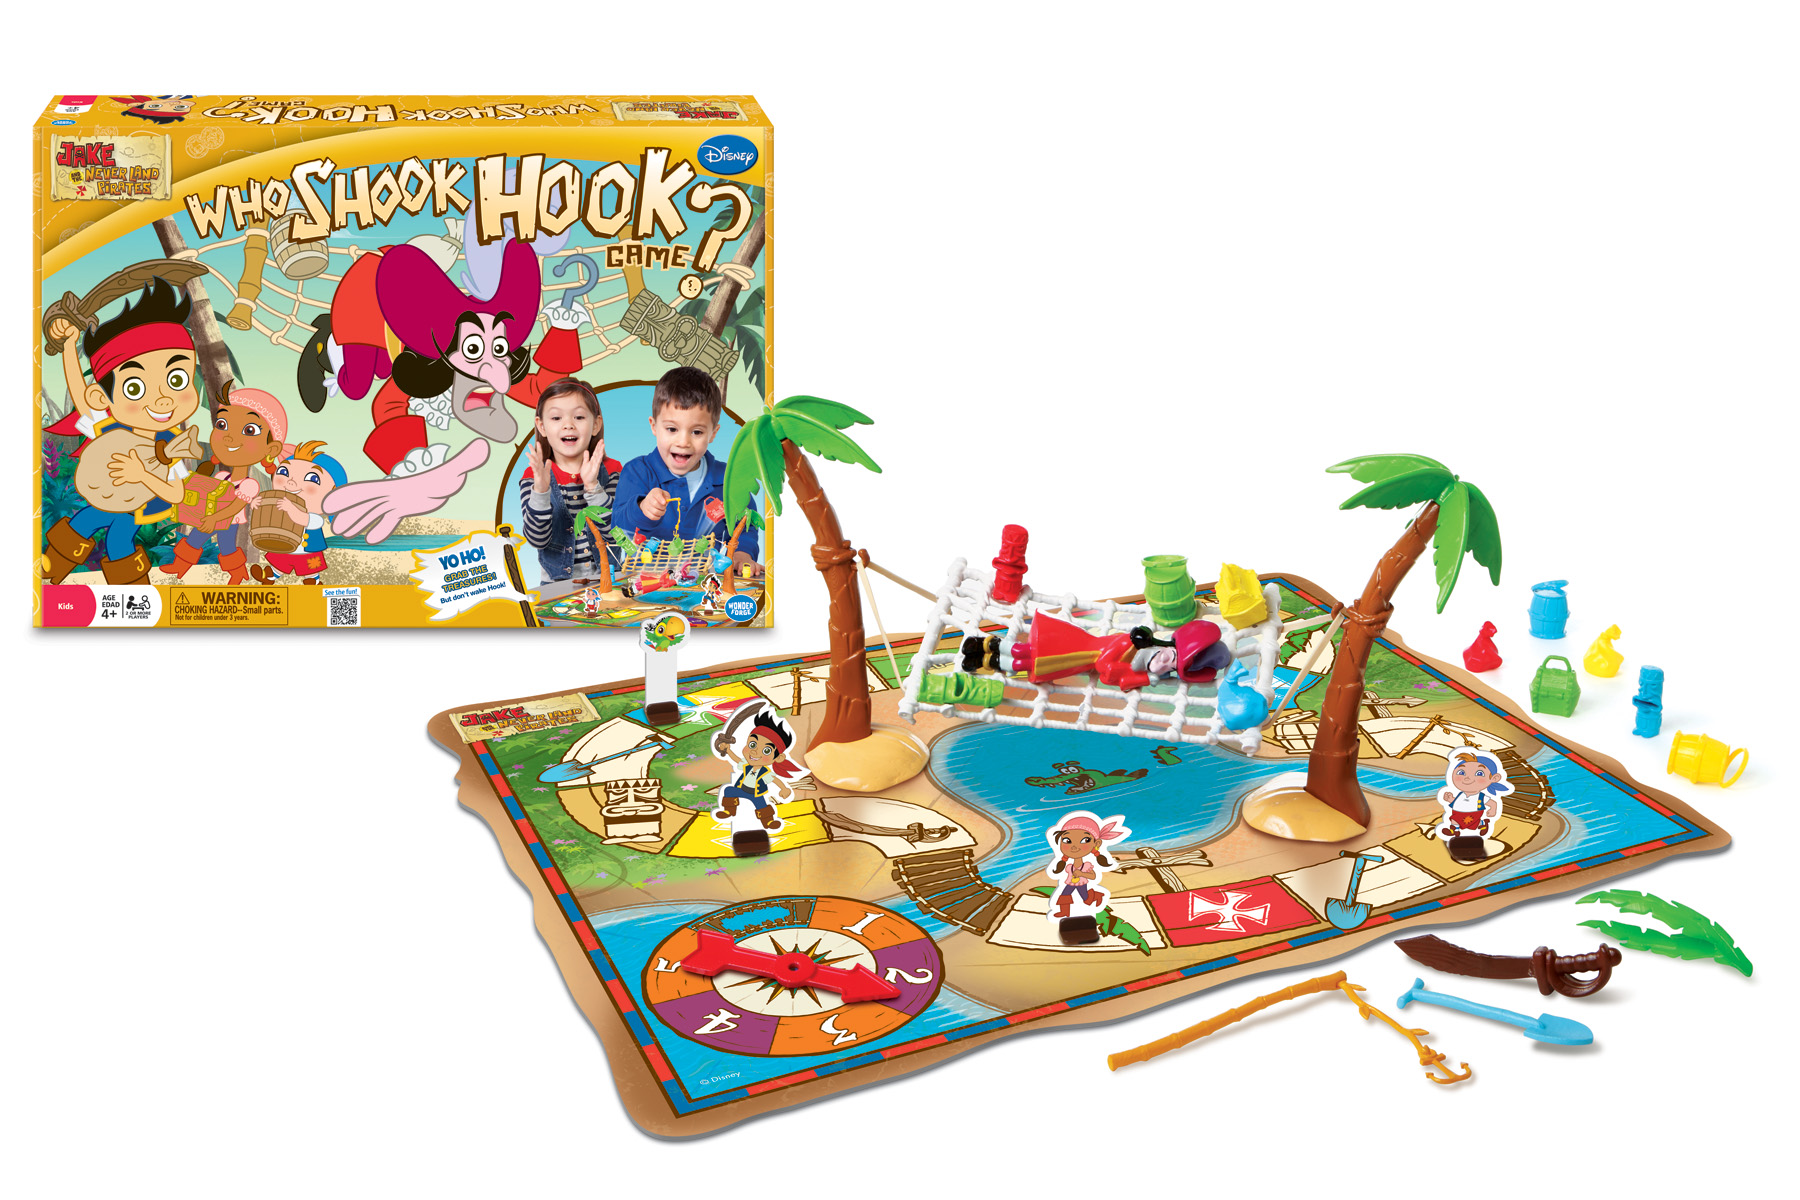 Jake and The Never Land Pirates Who Shook Hook game review | Daddy Mojo